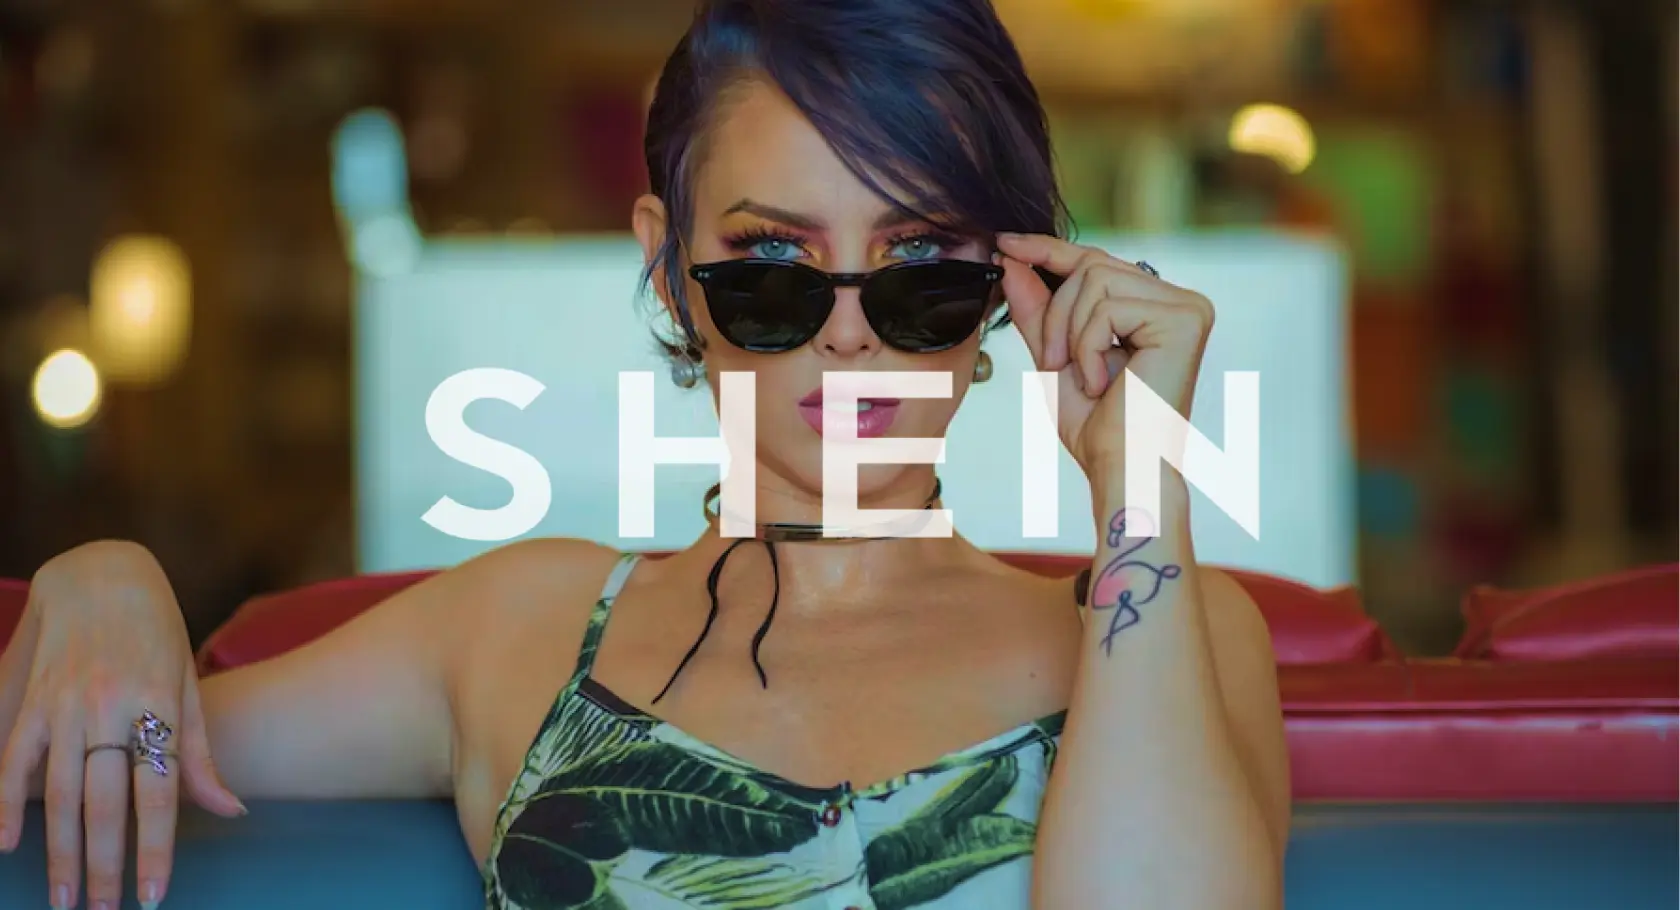 How to apply referral code at shein